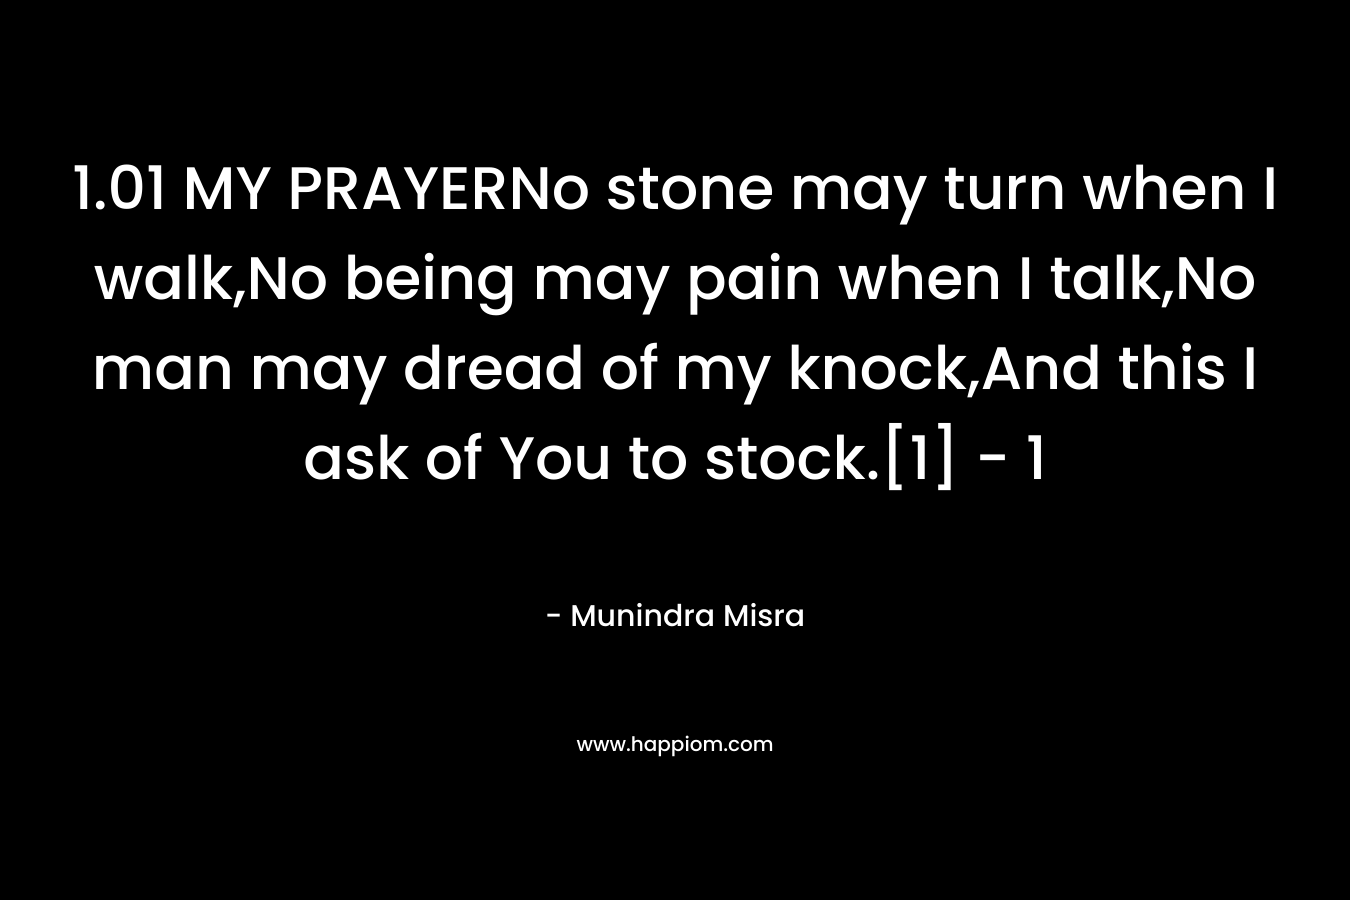 1.01 MY PRAYERNo stone may turn when I walk,No being may pain when I talk,No man may dread of my knock,And this I ask of You to stock.[1]	- 1